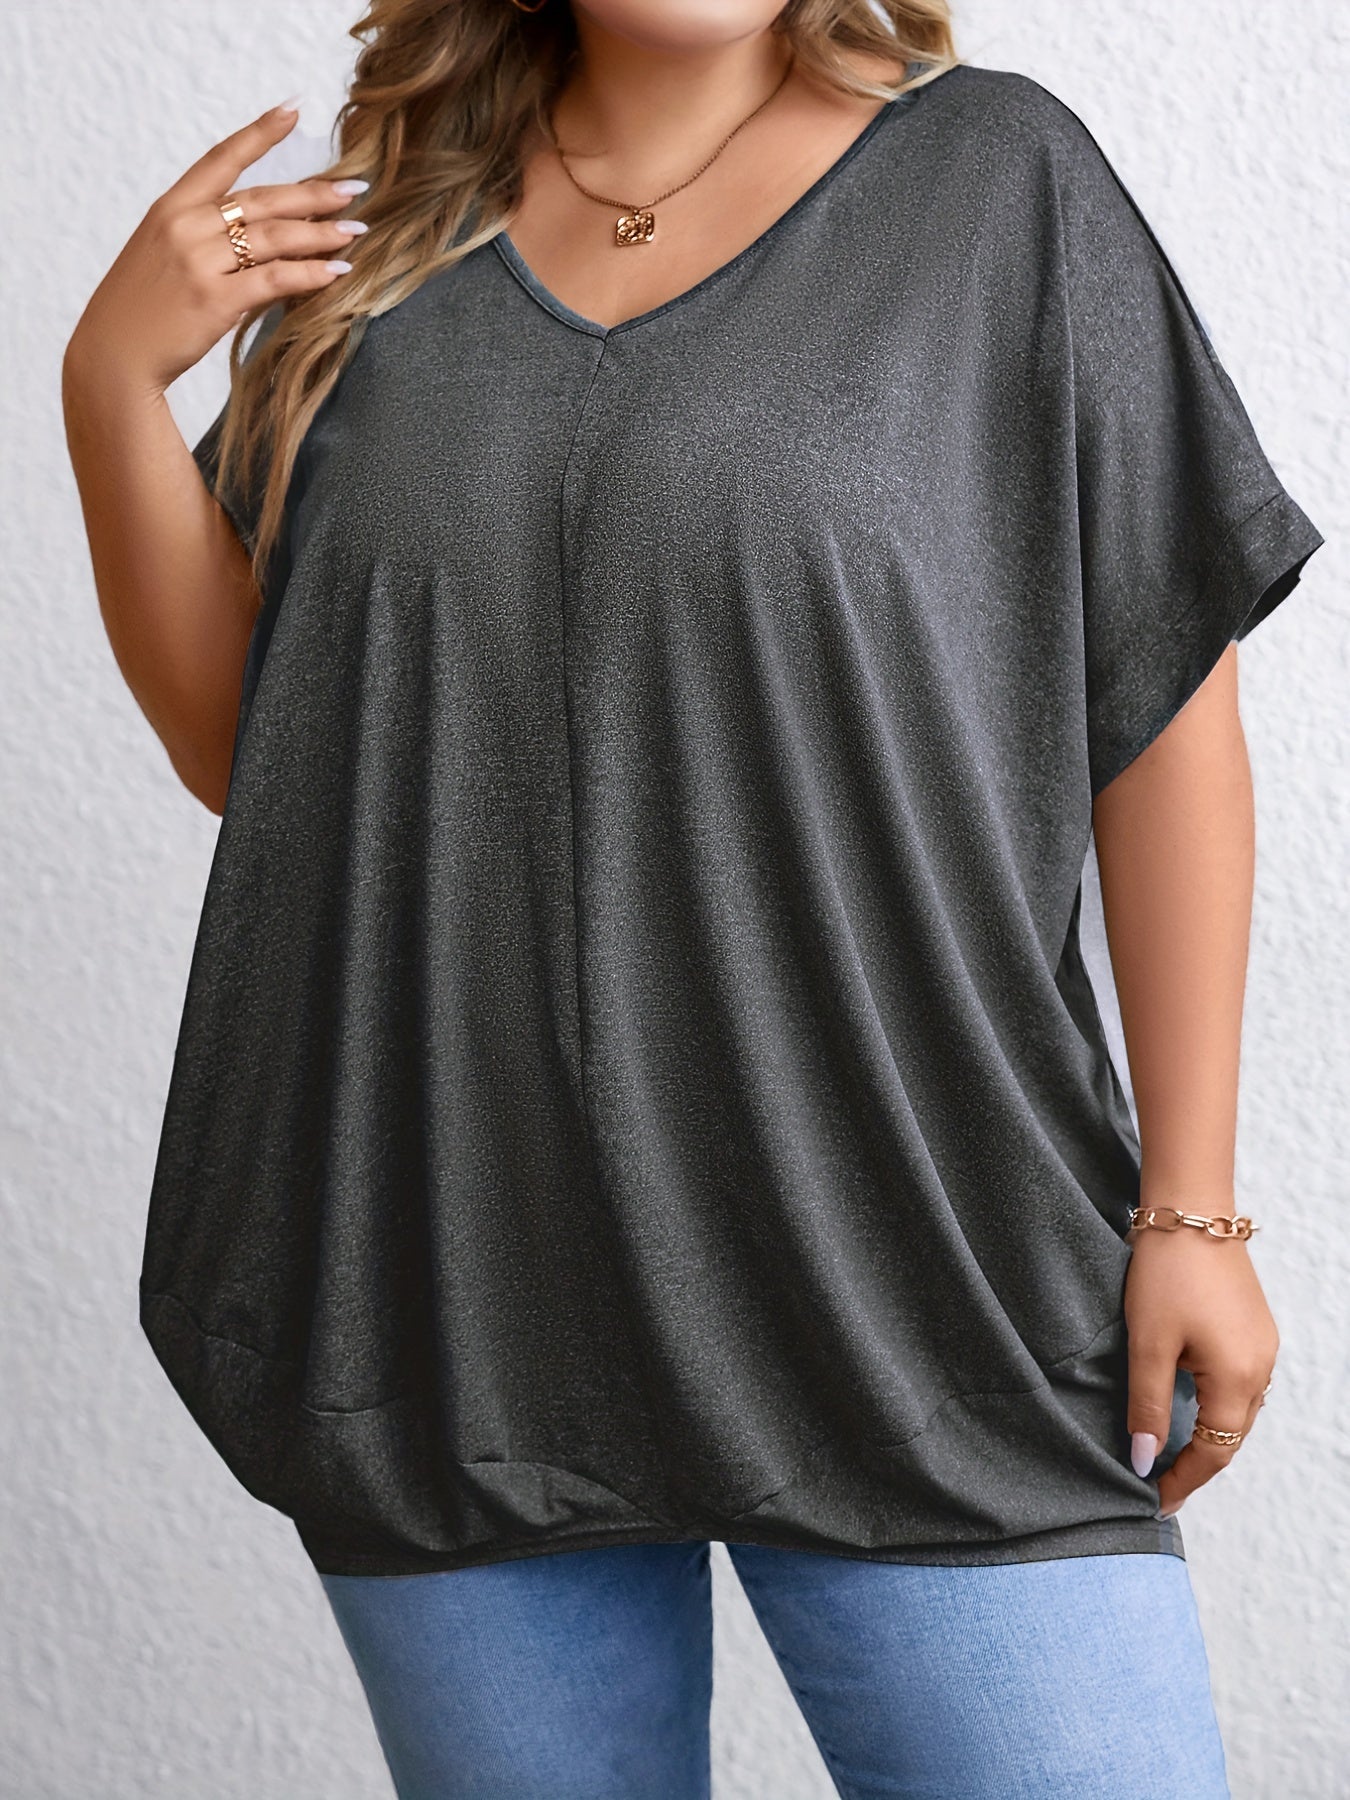 Plus Size Casual Top, Women's Plus Solid Bat Sleeve V Neck Ruched Asymmetrical Hem Oversized Tee